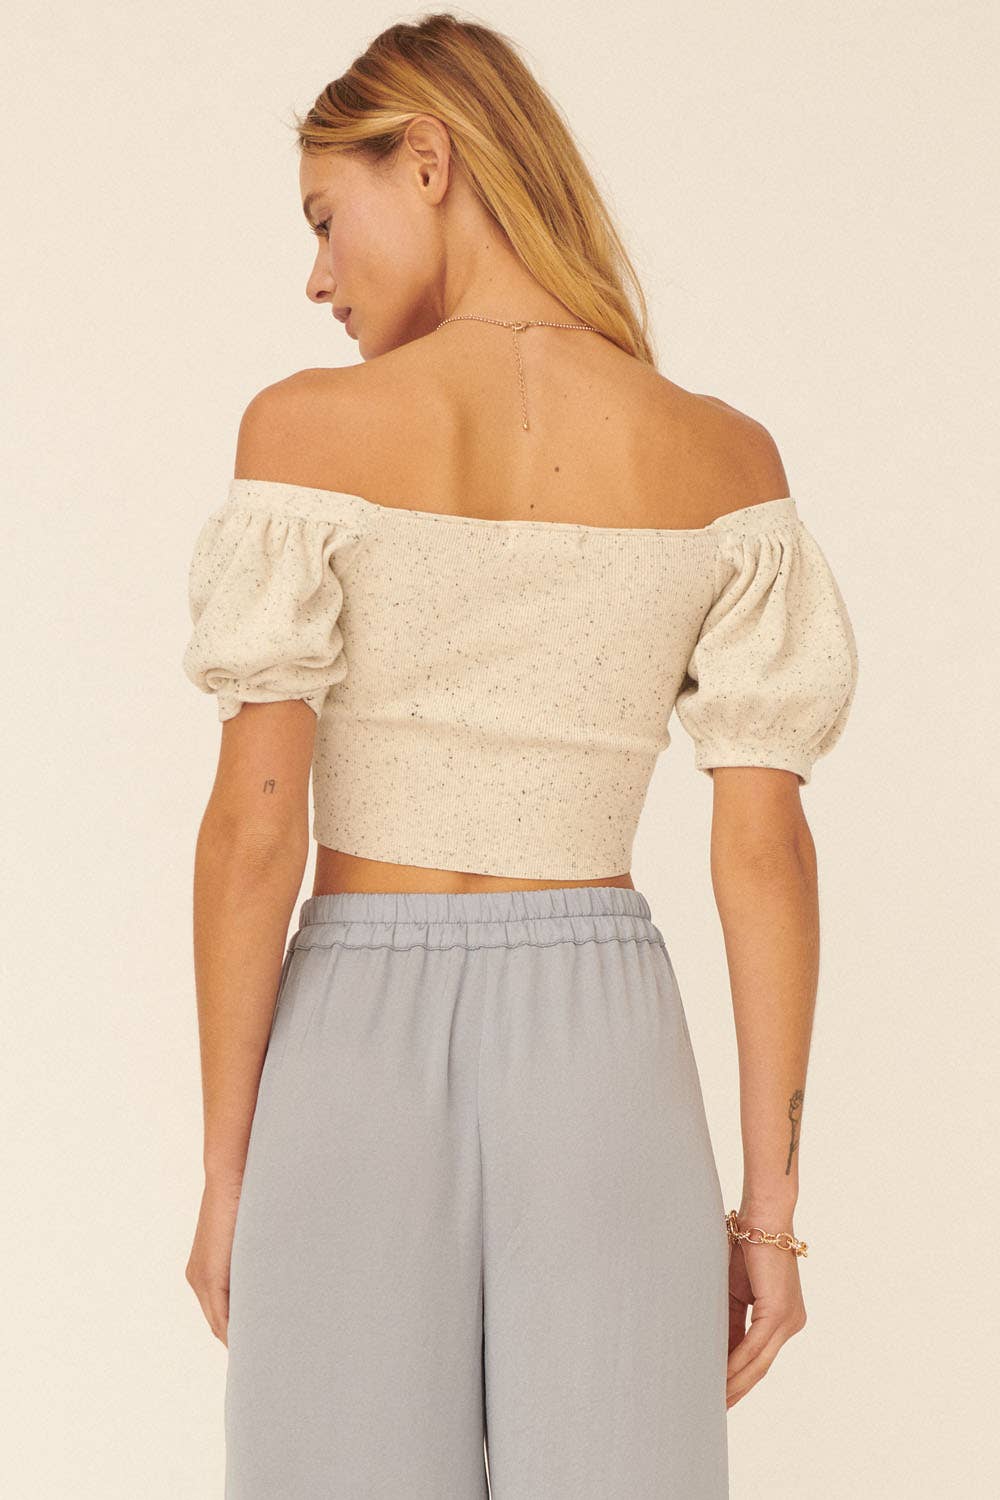 Addy Speckled Rib Knit Off Shoulder Puff Crop Sweater - Sweater Crop Top - essecoco